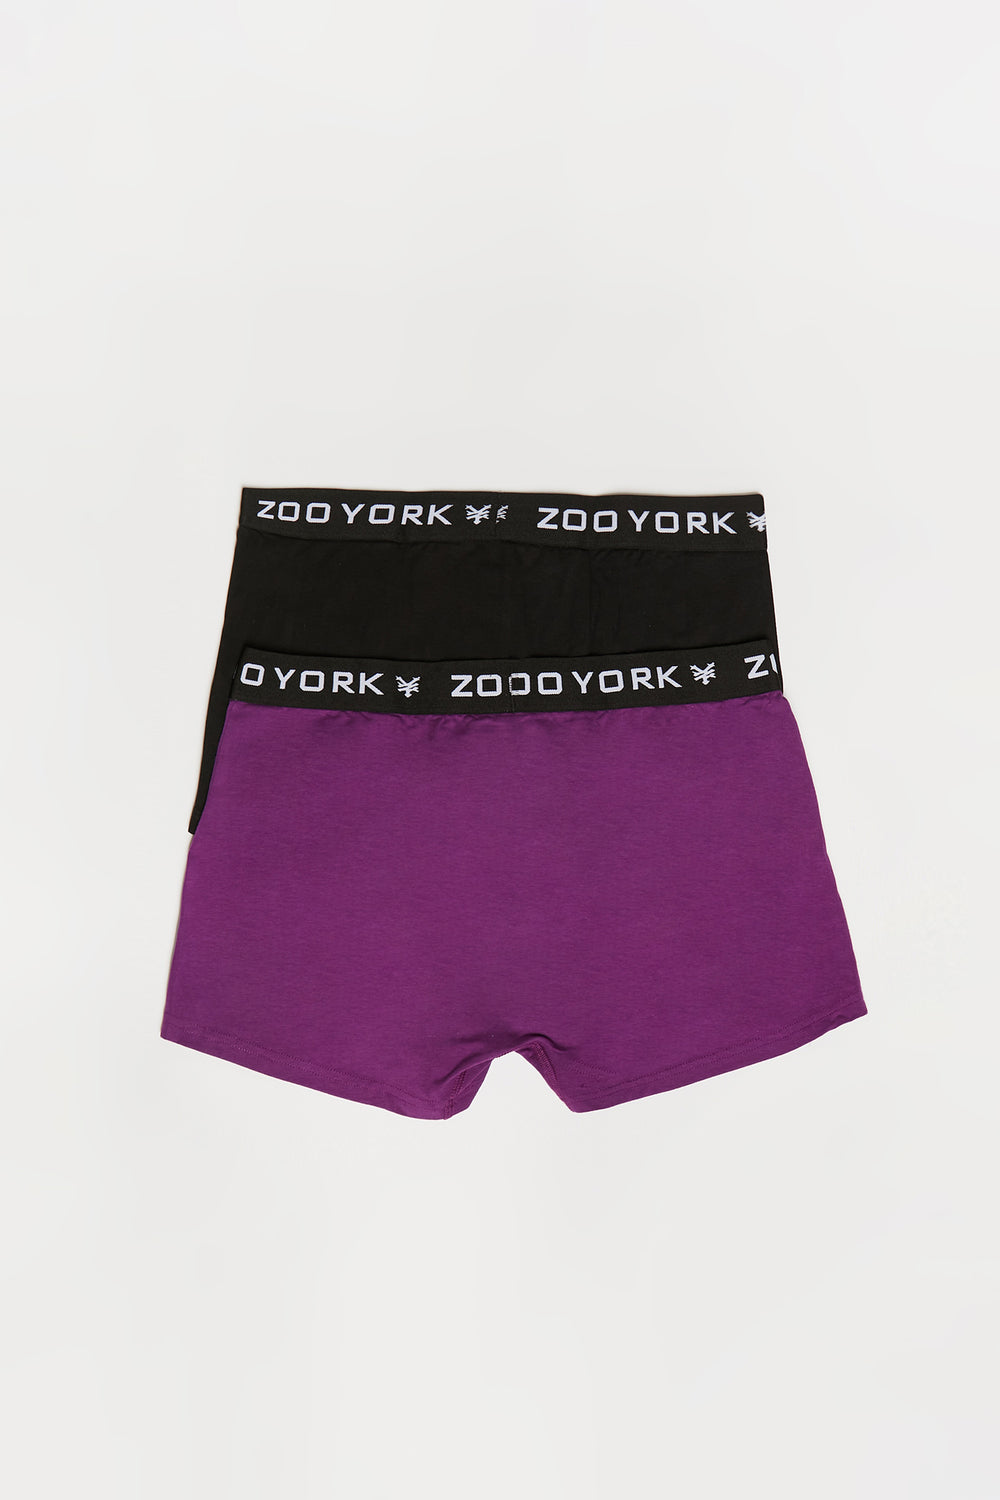 Zoo York Youth 2-Pack Boxer Briefs Purple